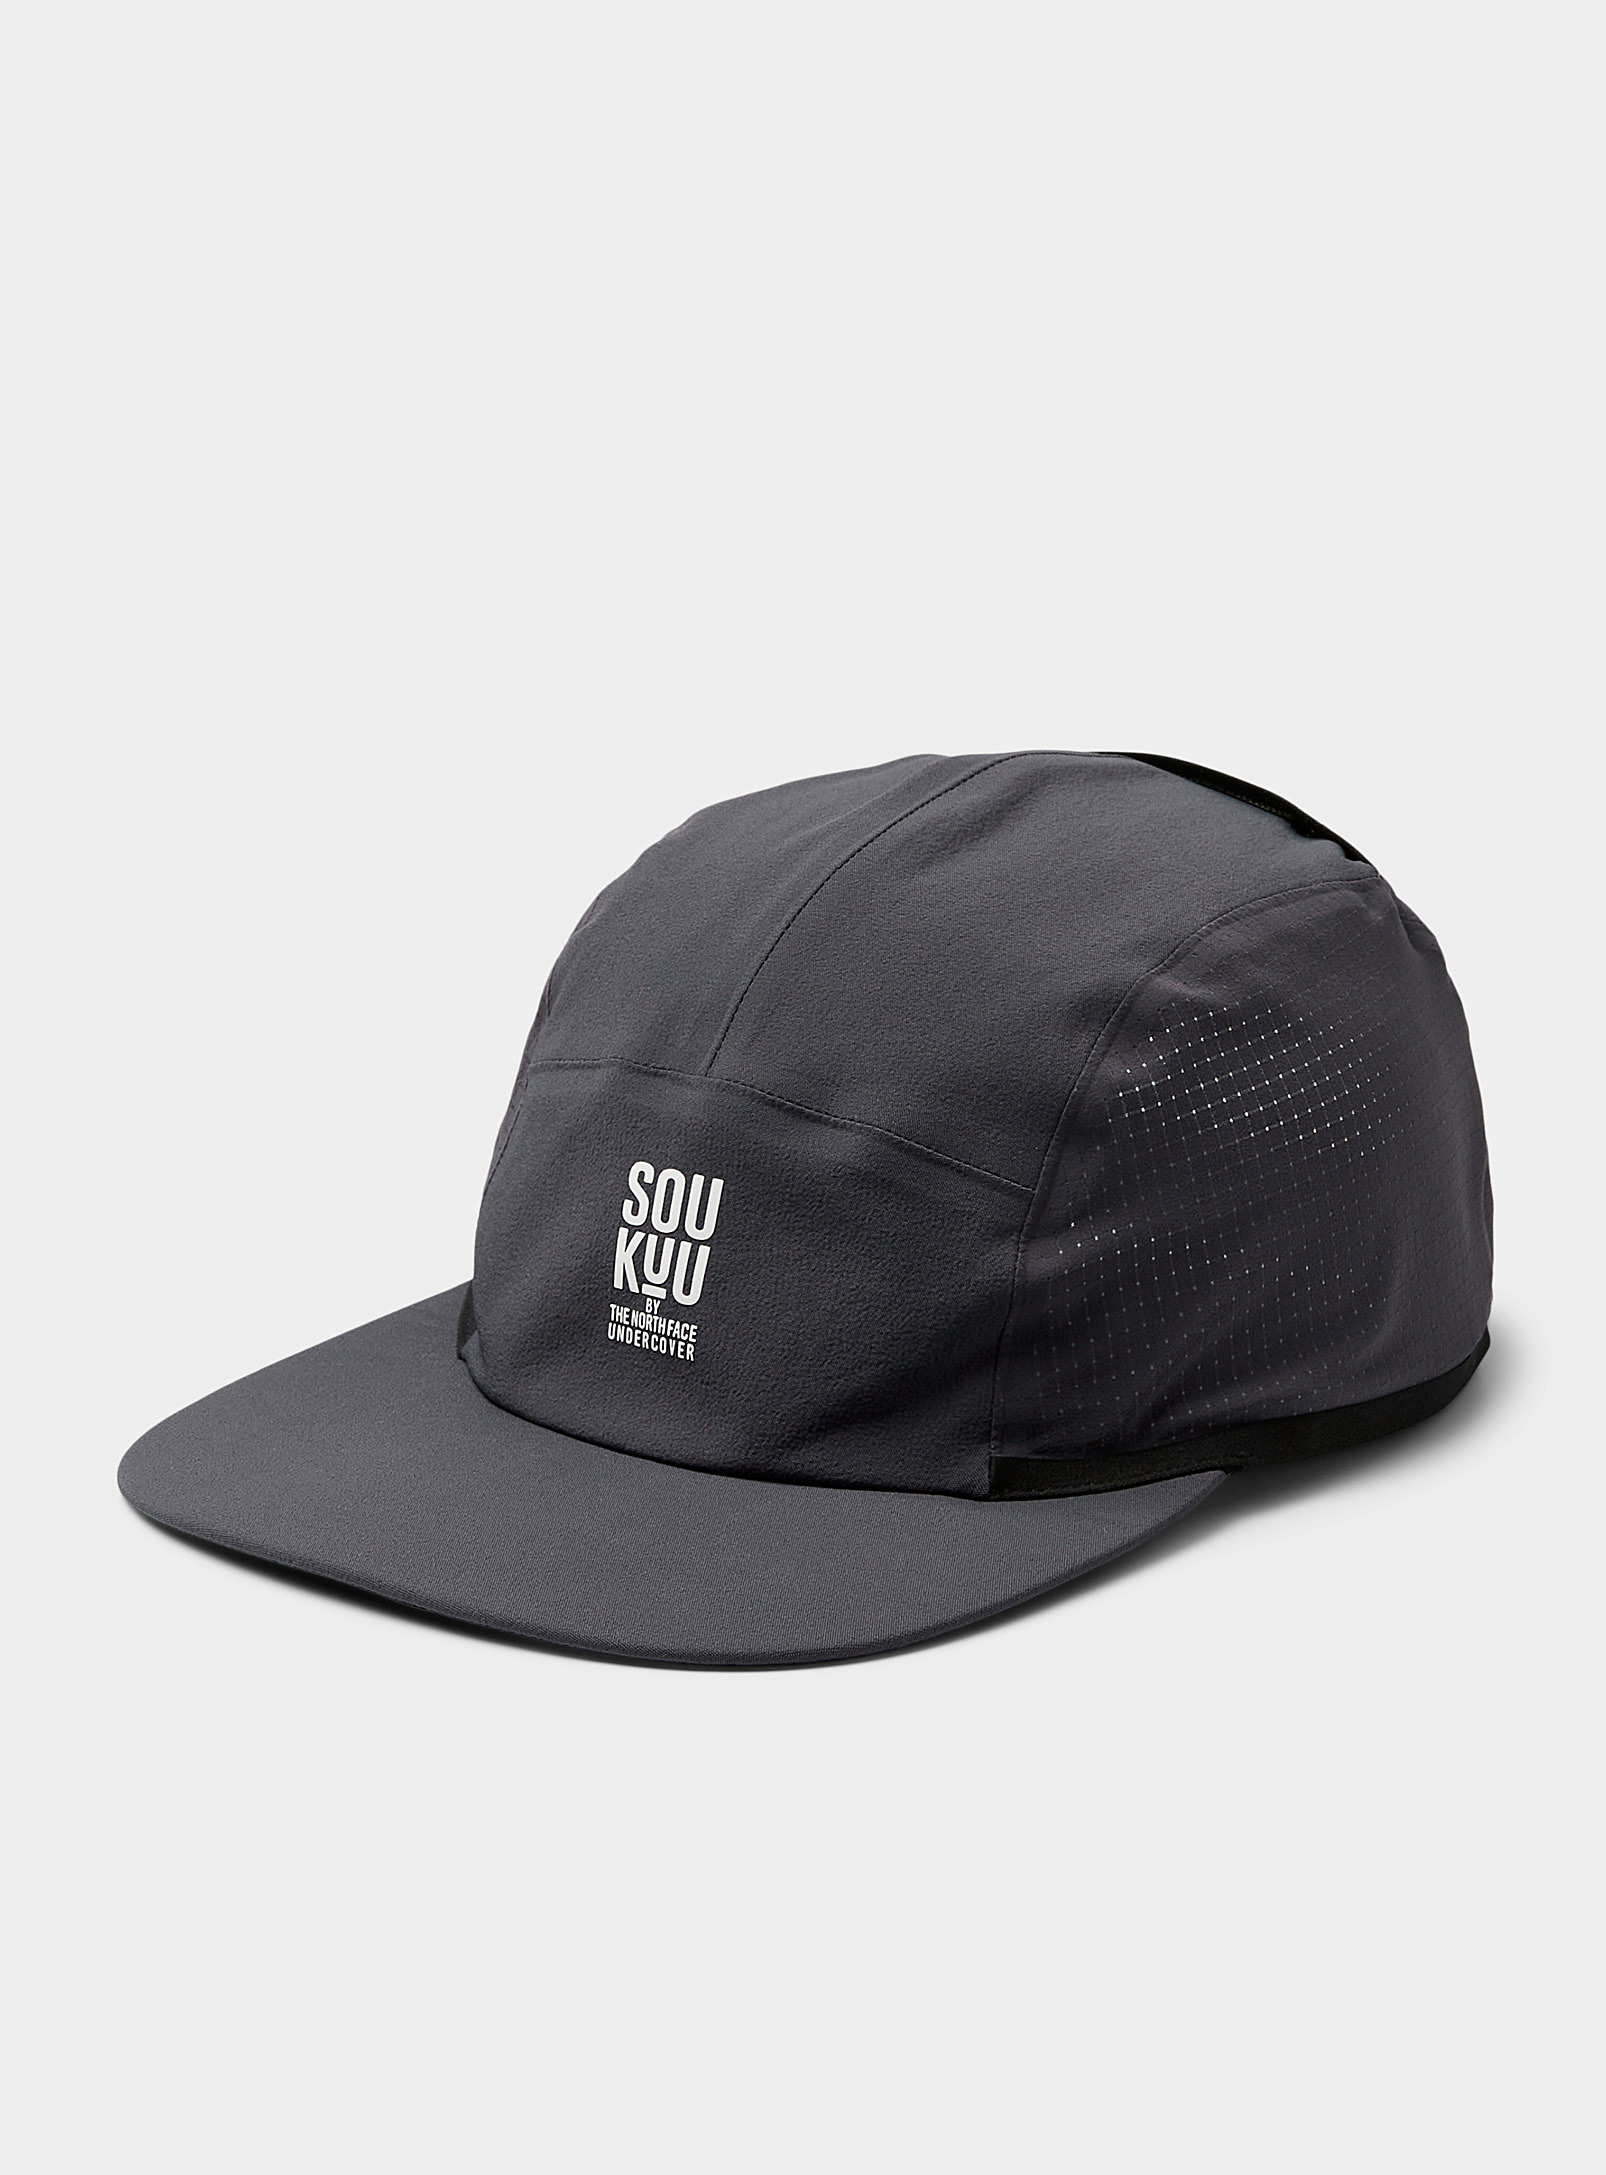 The North Face X Undercover Soukuu Cap In Grey